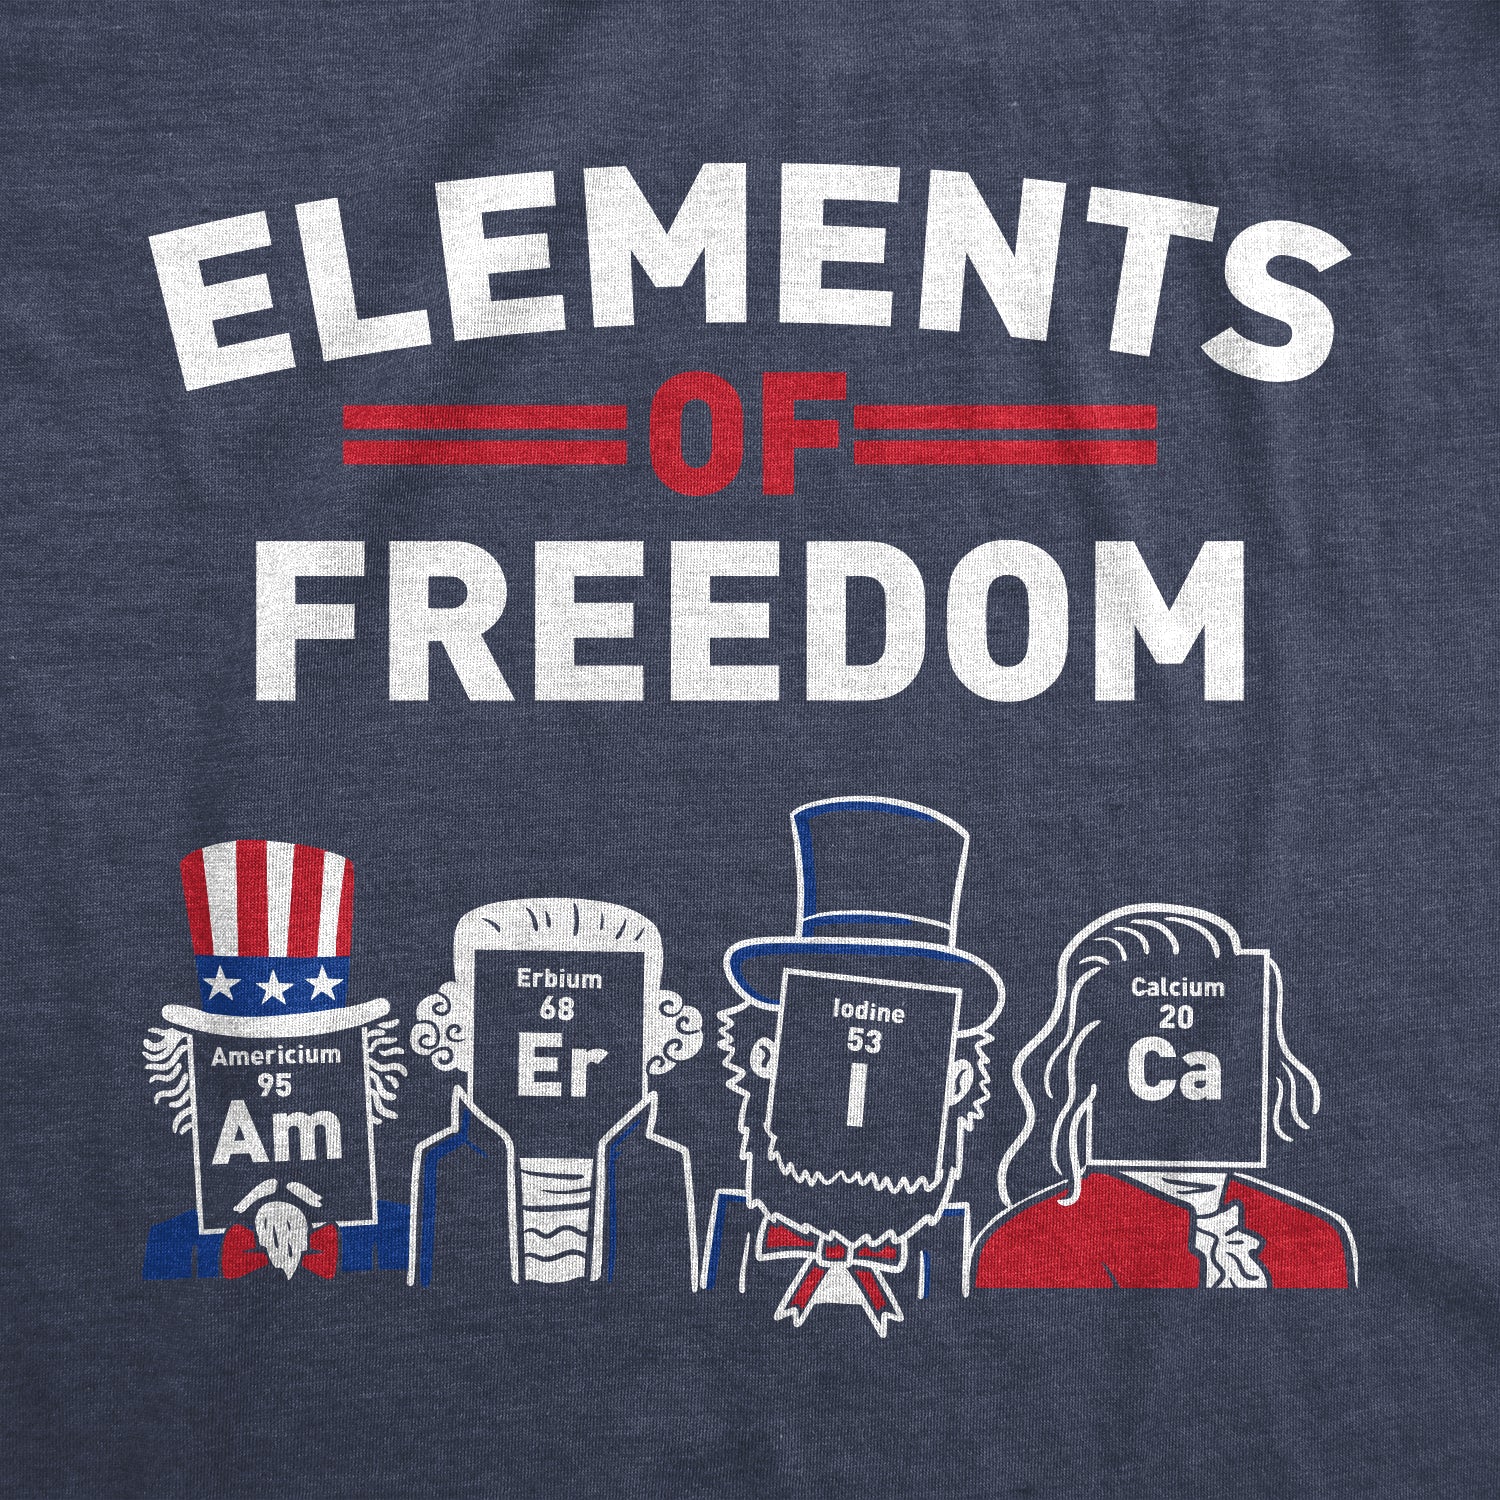 Funny Heather Navy - Element Freedom The Element Of Freedom Womens T Shirt Nerdy Fourth Of July Science Tee